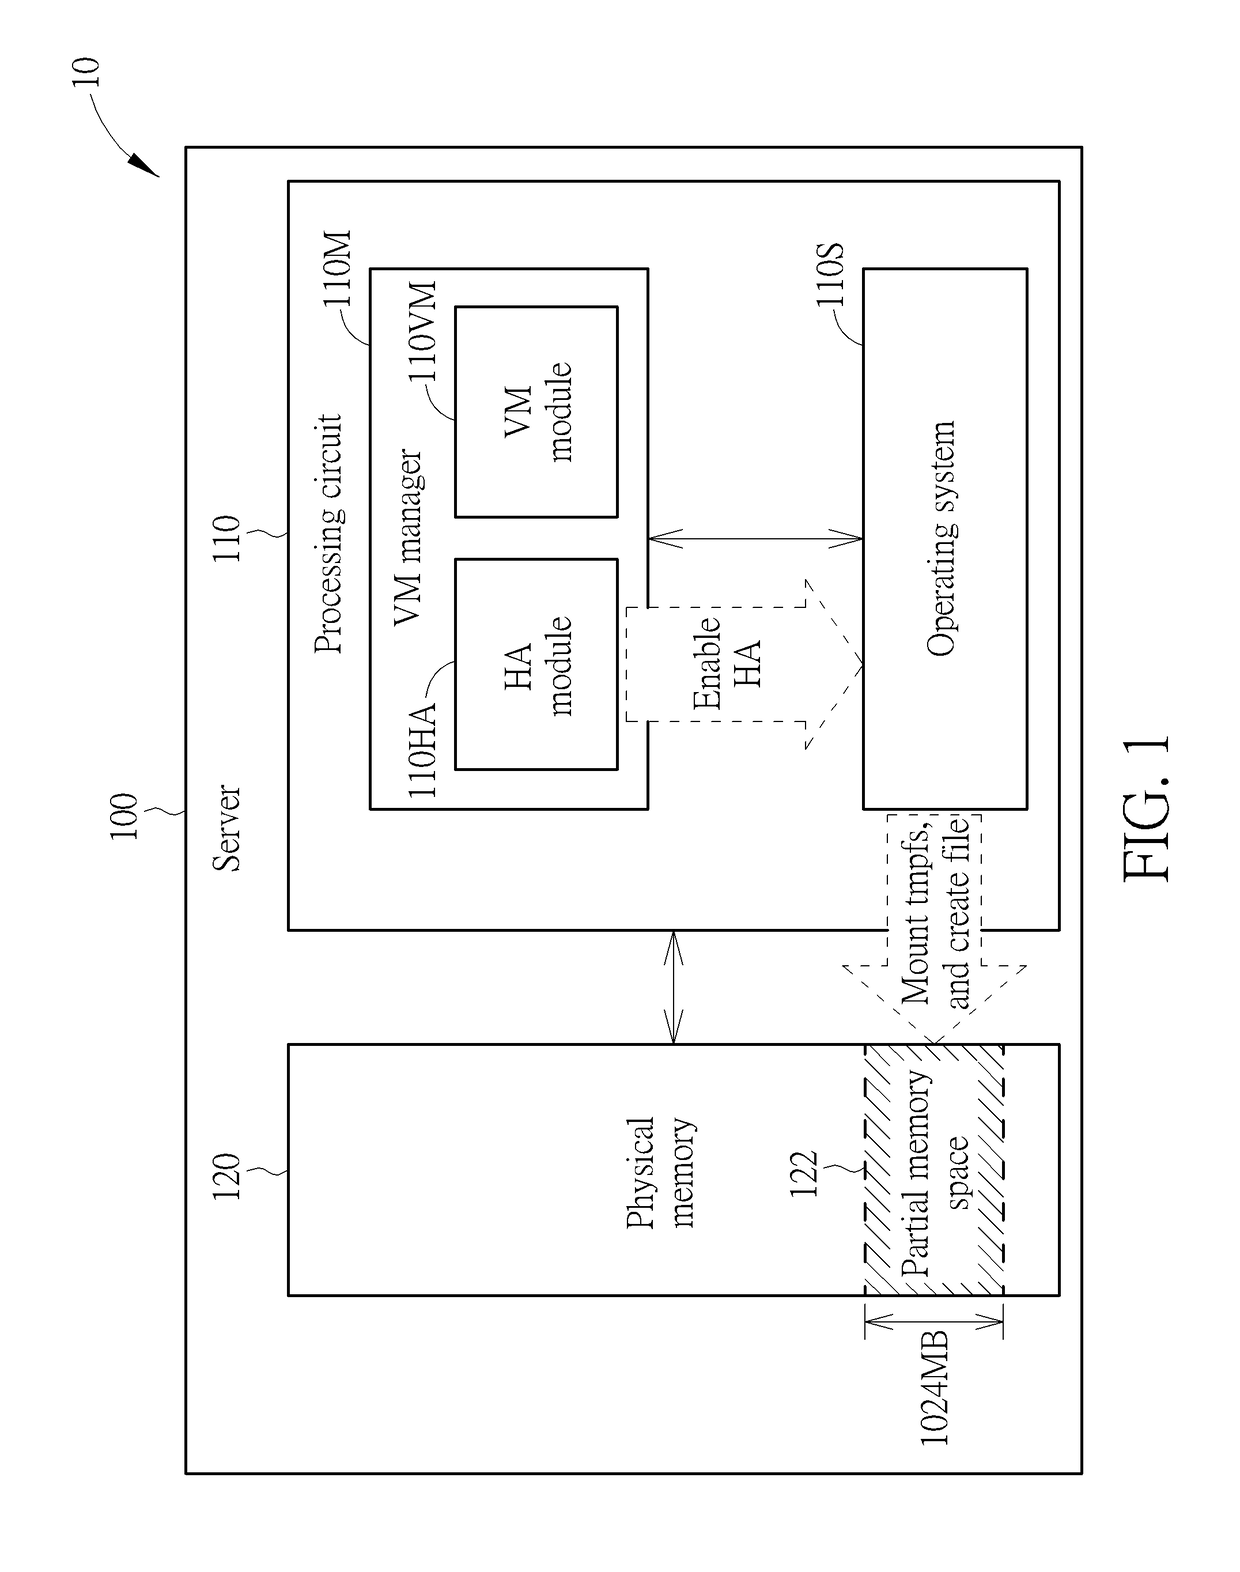 Method and apparatus for performing memory space reservation and management